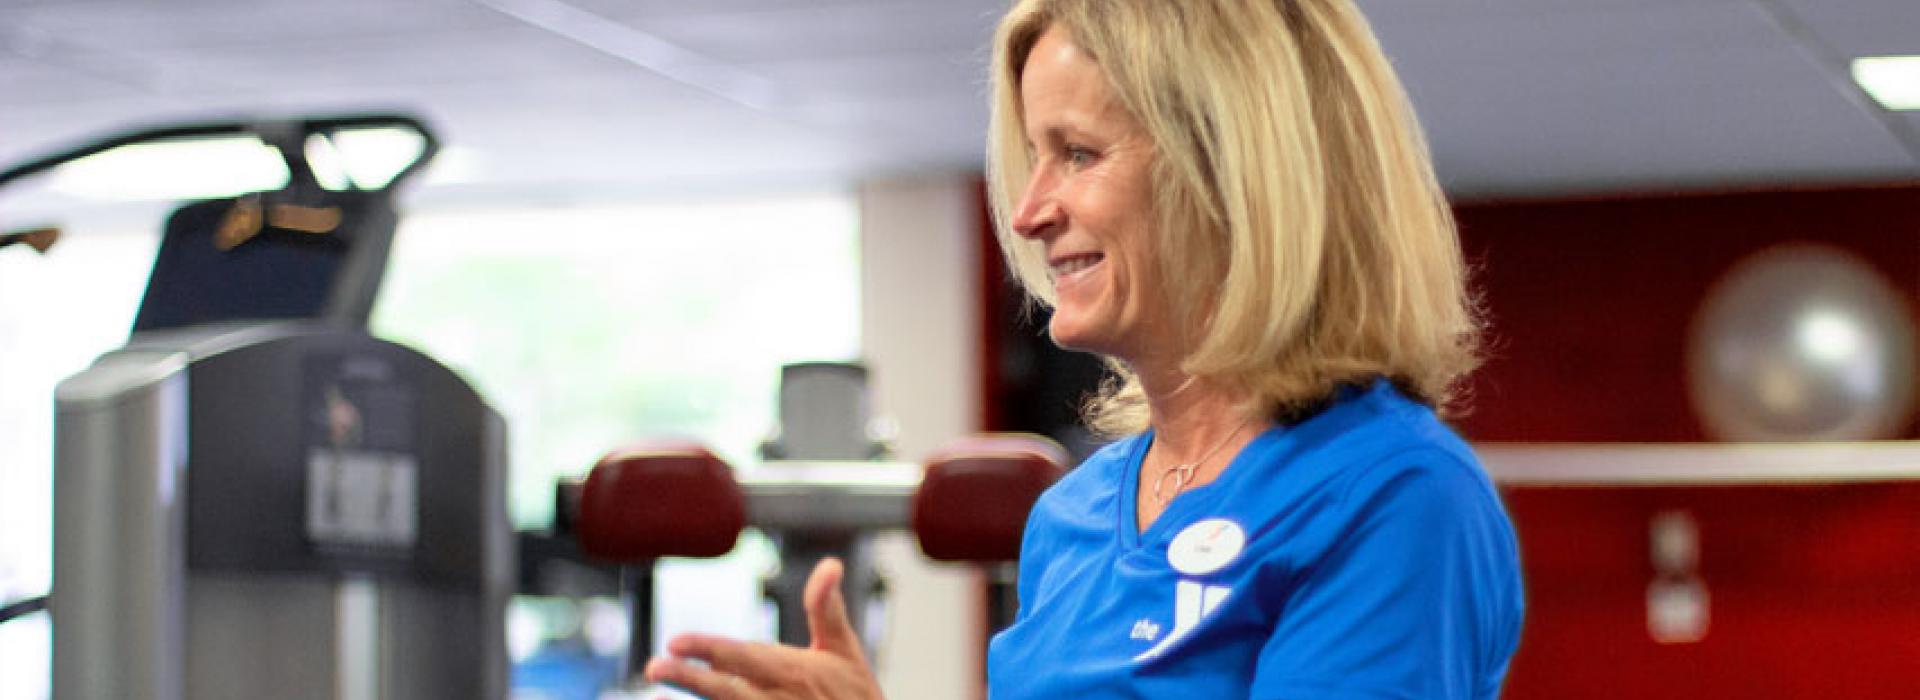 West Chester Area YMCA Personal Trainer Cari Wolfe instructs a client during a training session in the wellness center.